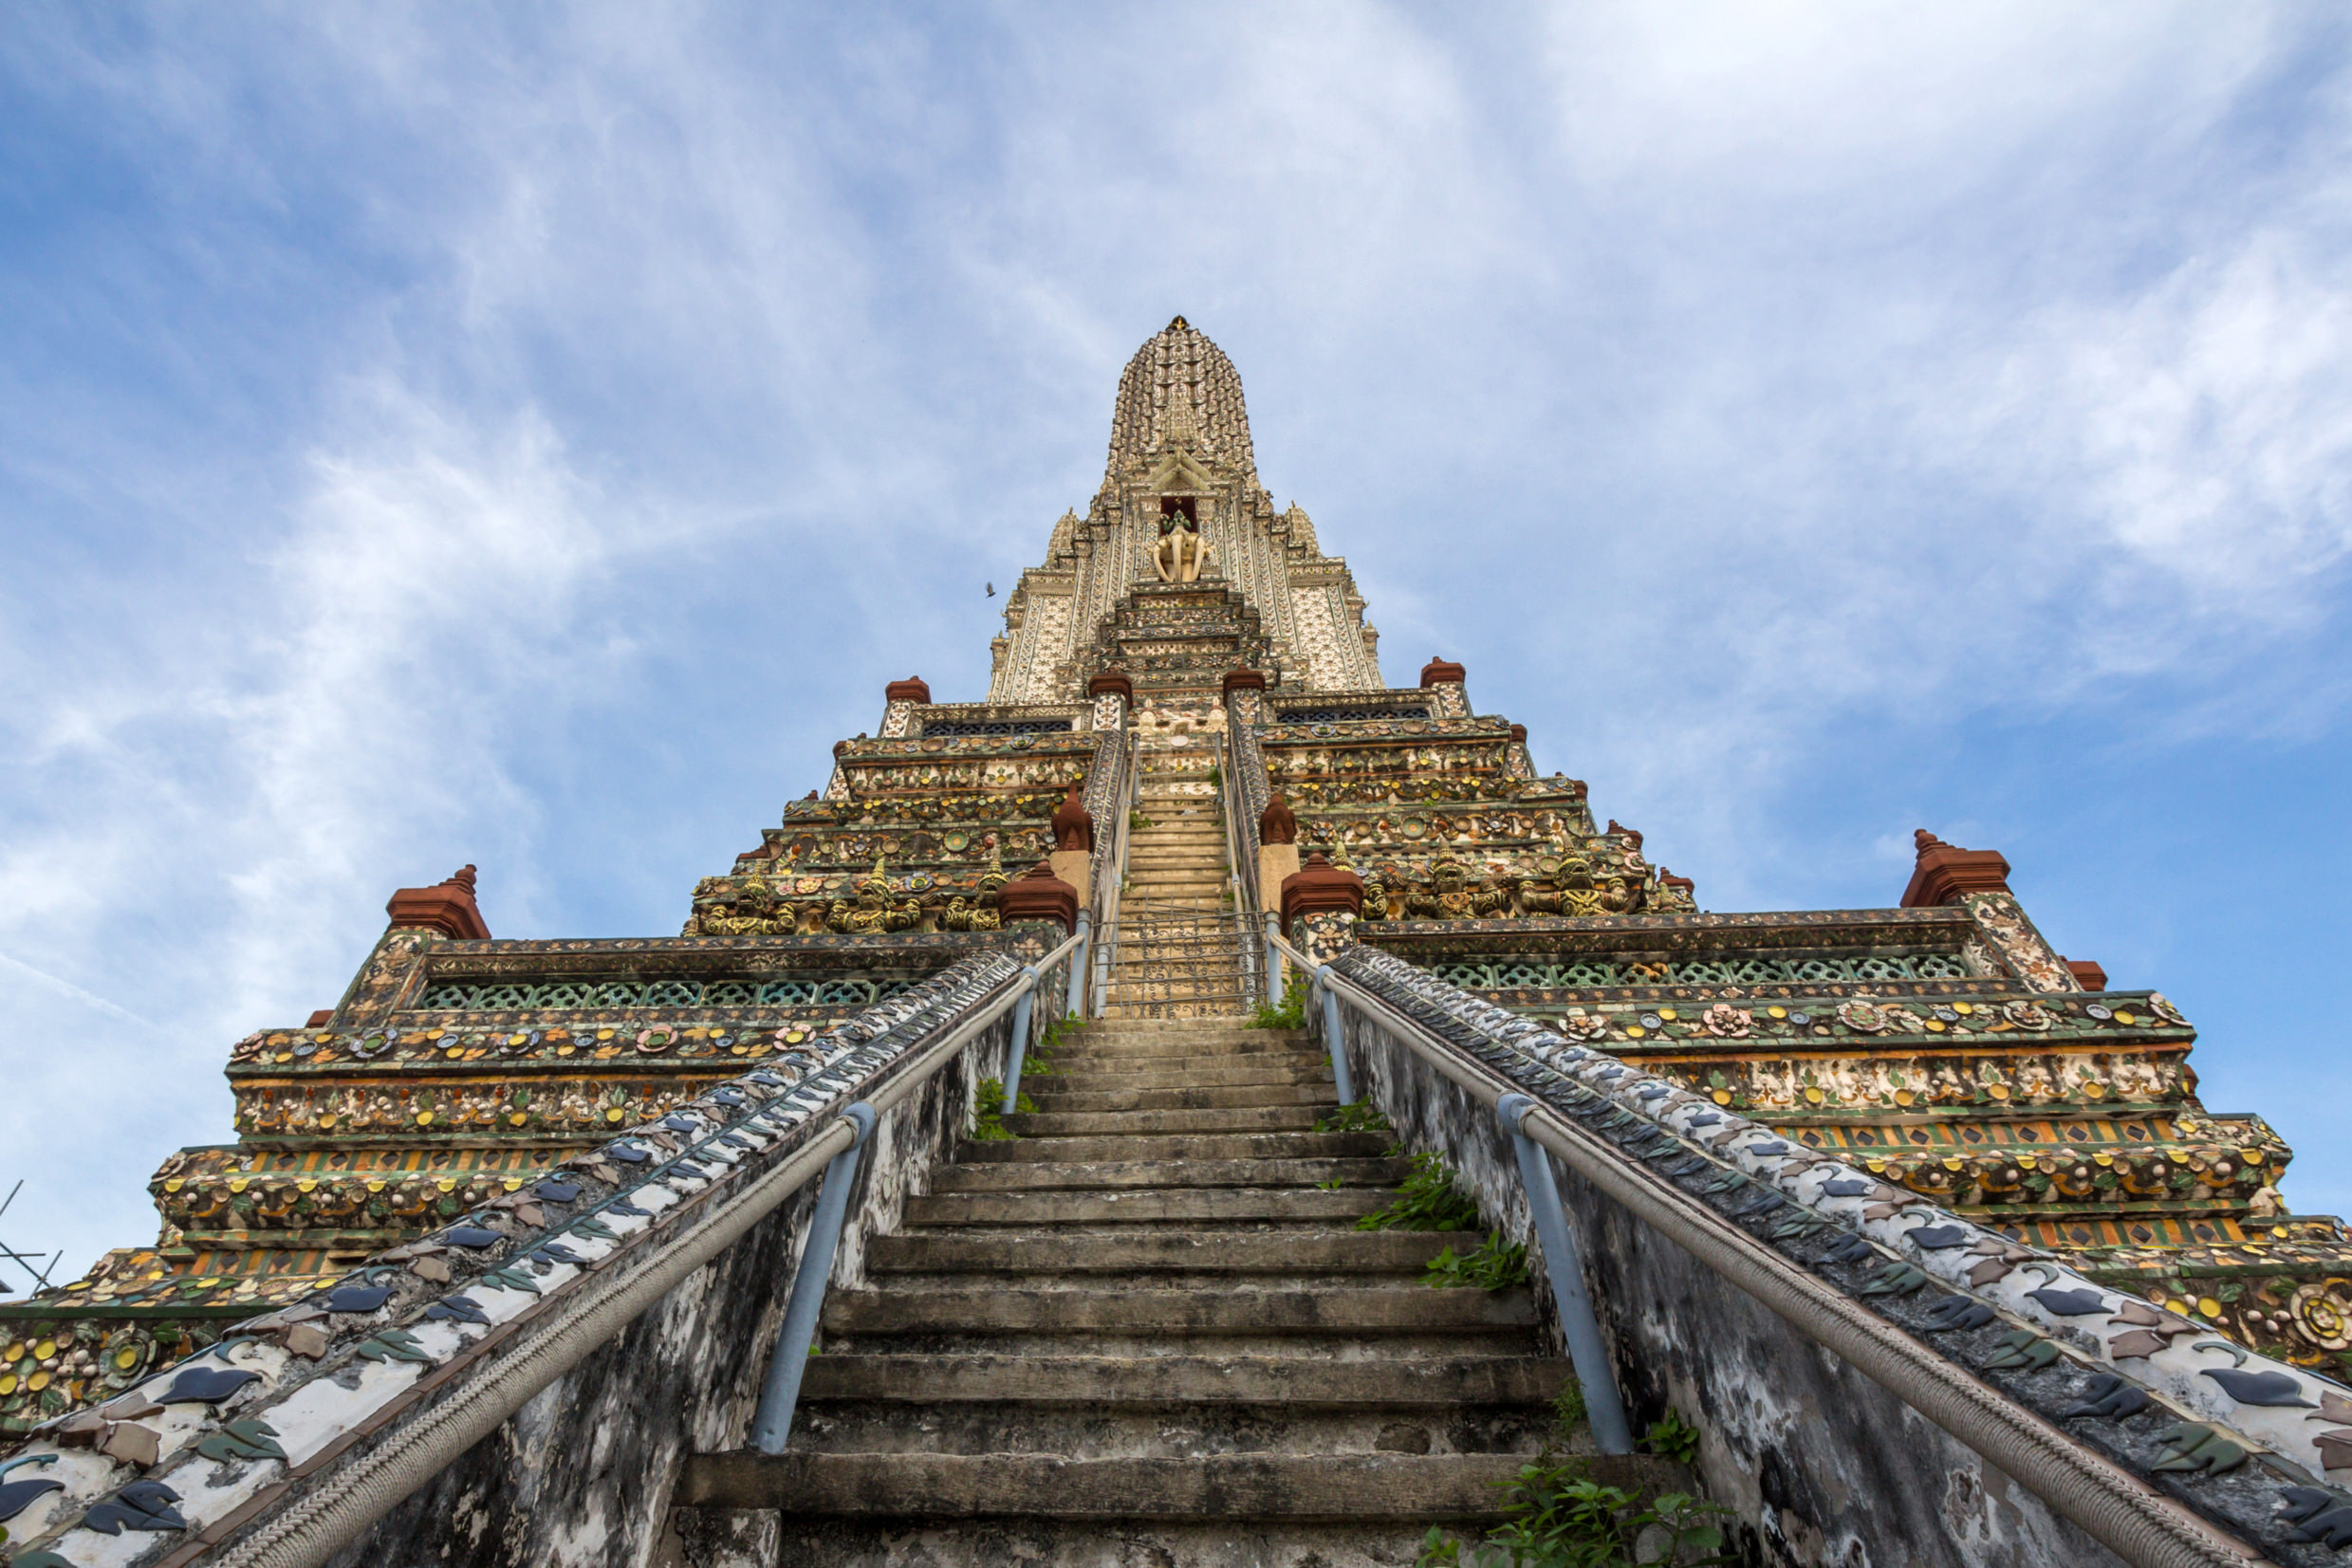 Looking from the bottom of the steps which lead up to the 82m-high þrahng at Wat Arun, Bangkok.